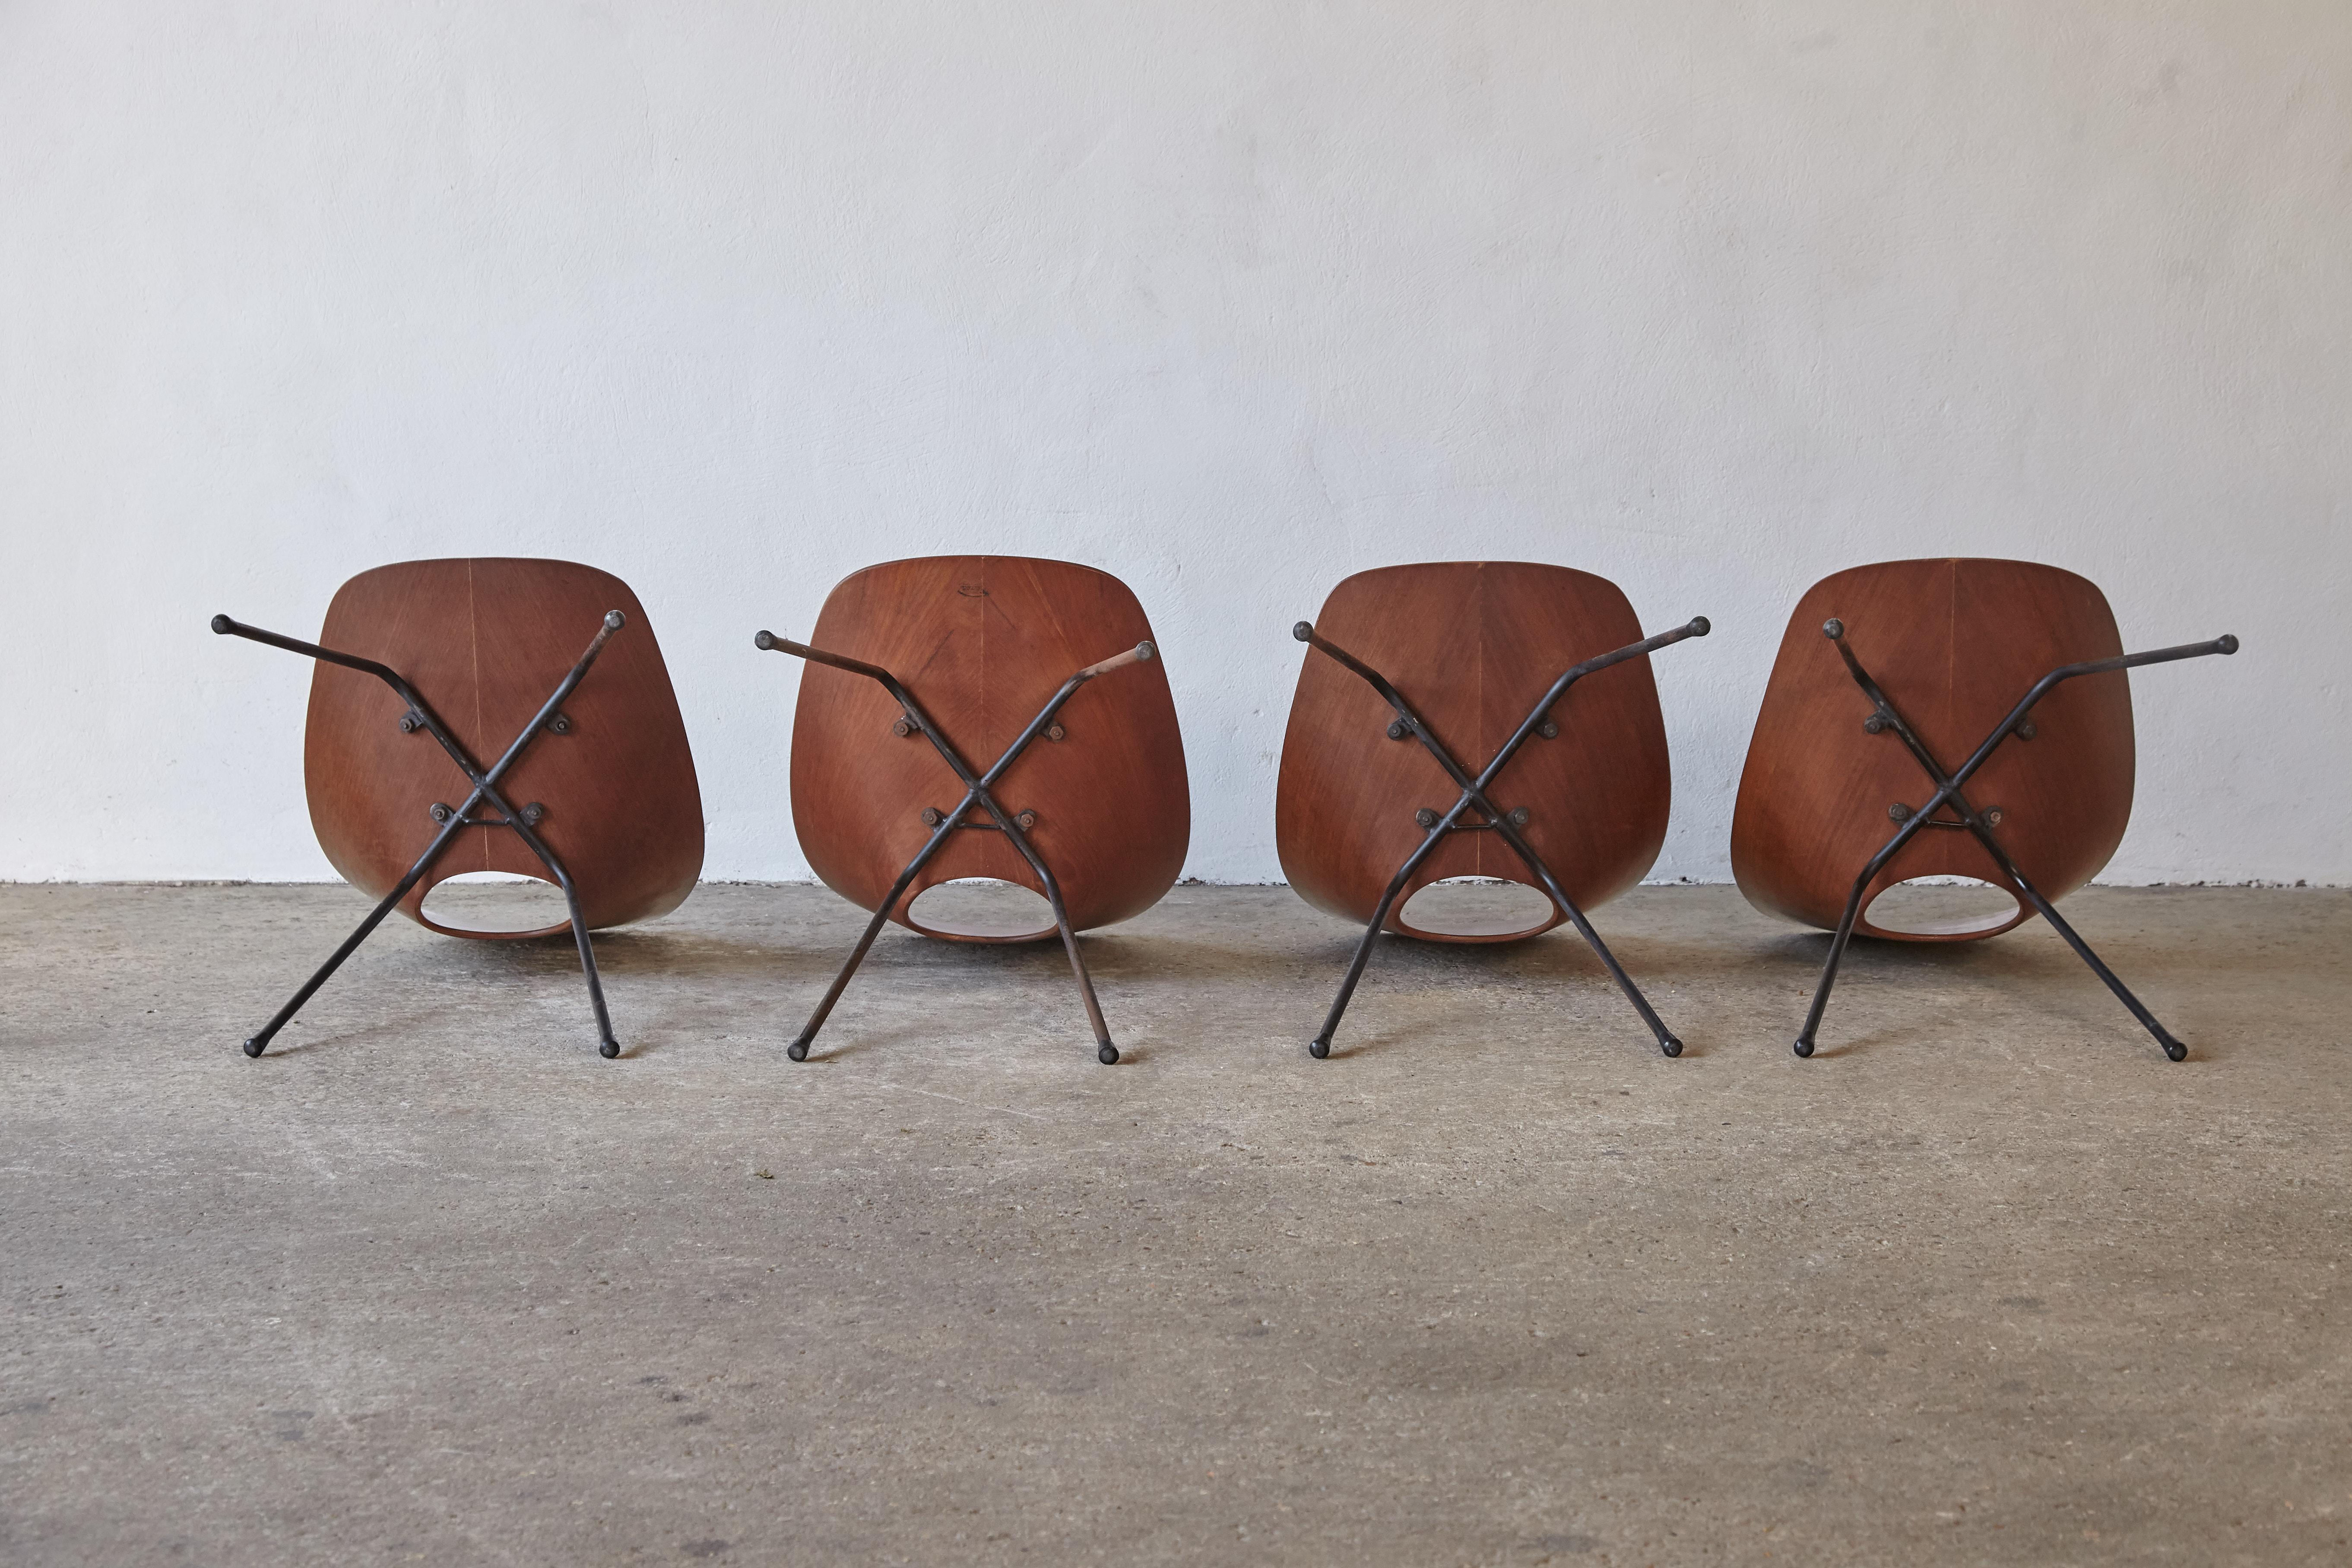 Set of 4 Medea Chairs by Vittorio Nobili, Fratelli Tagliabue, Italy, 1950s For Sale 5